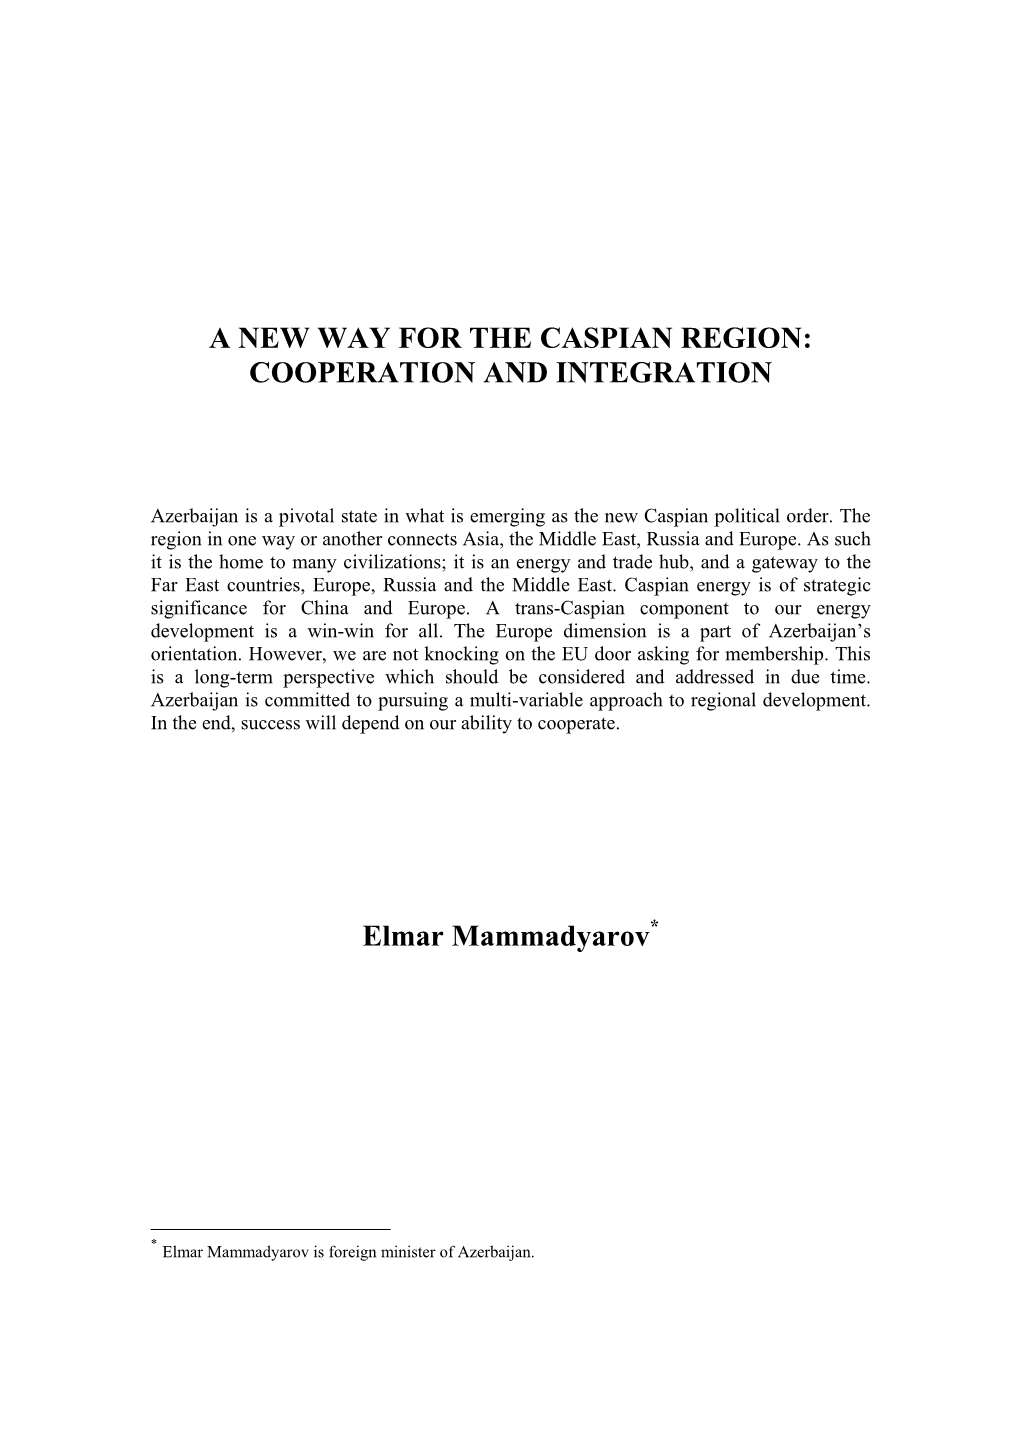 A New Way for the Caspian Region: Cooperation and Integration